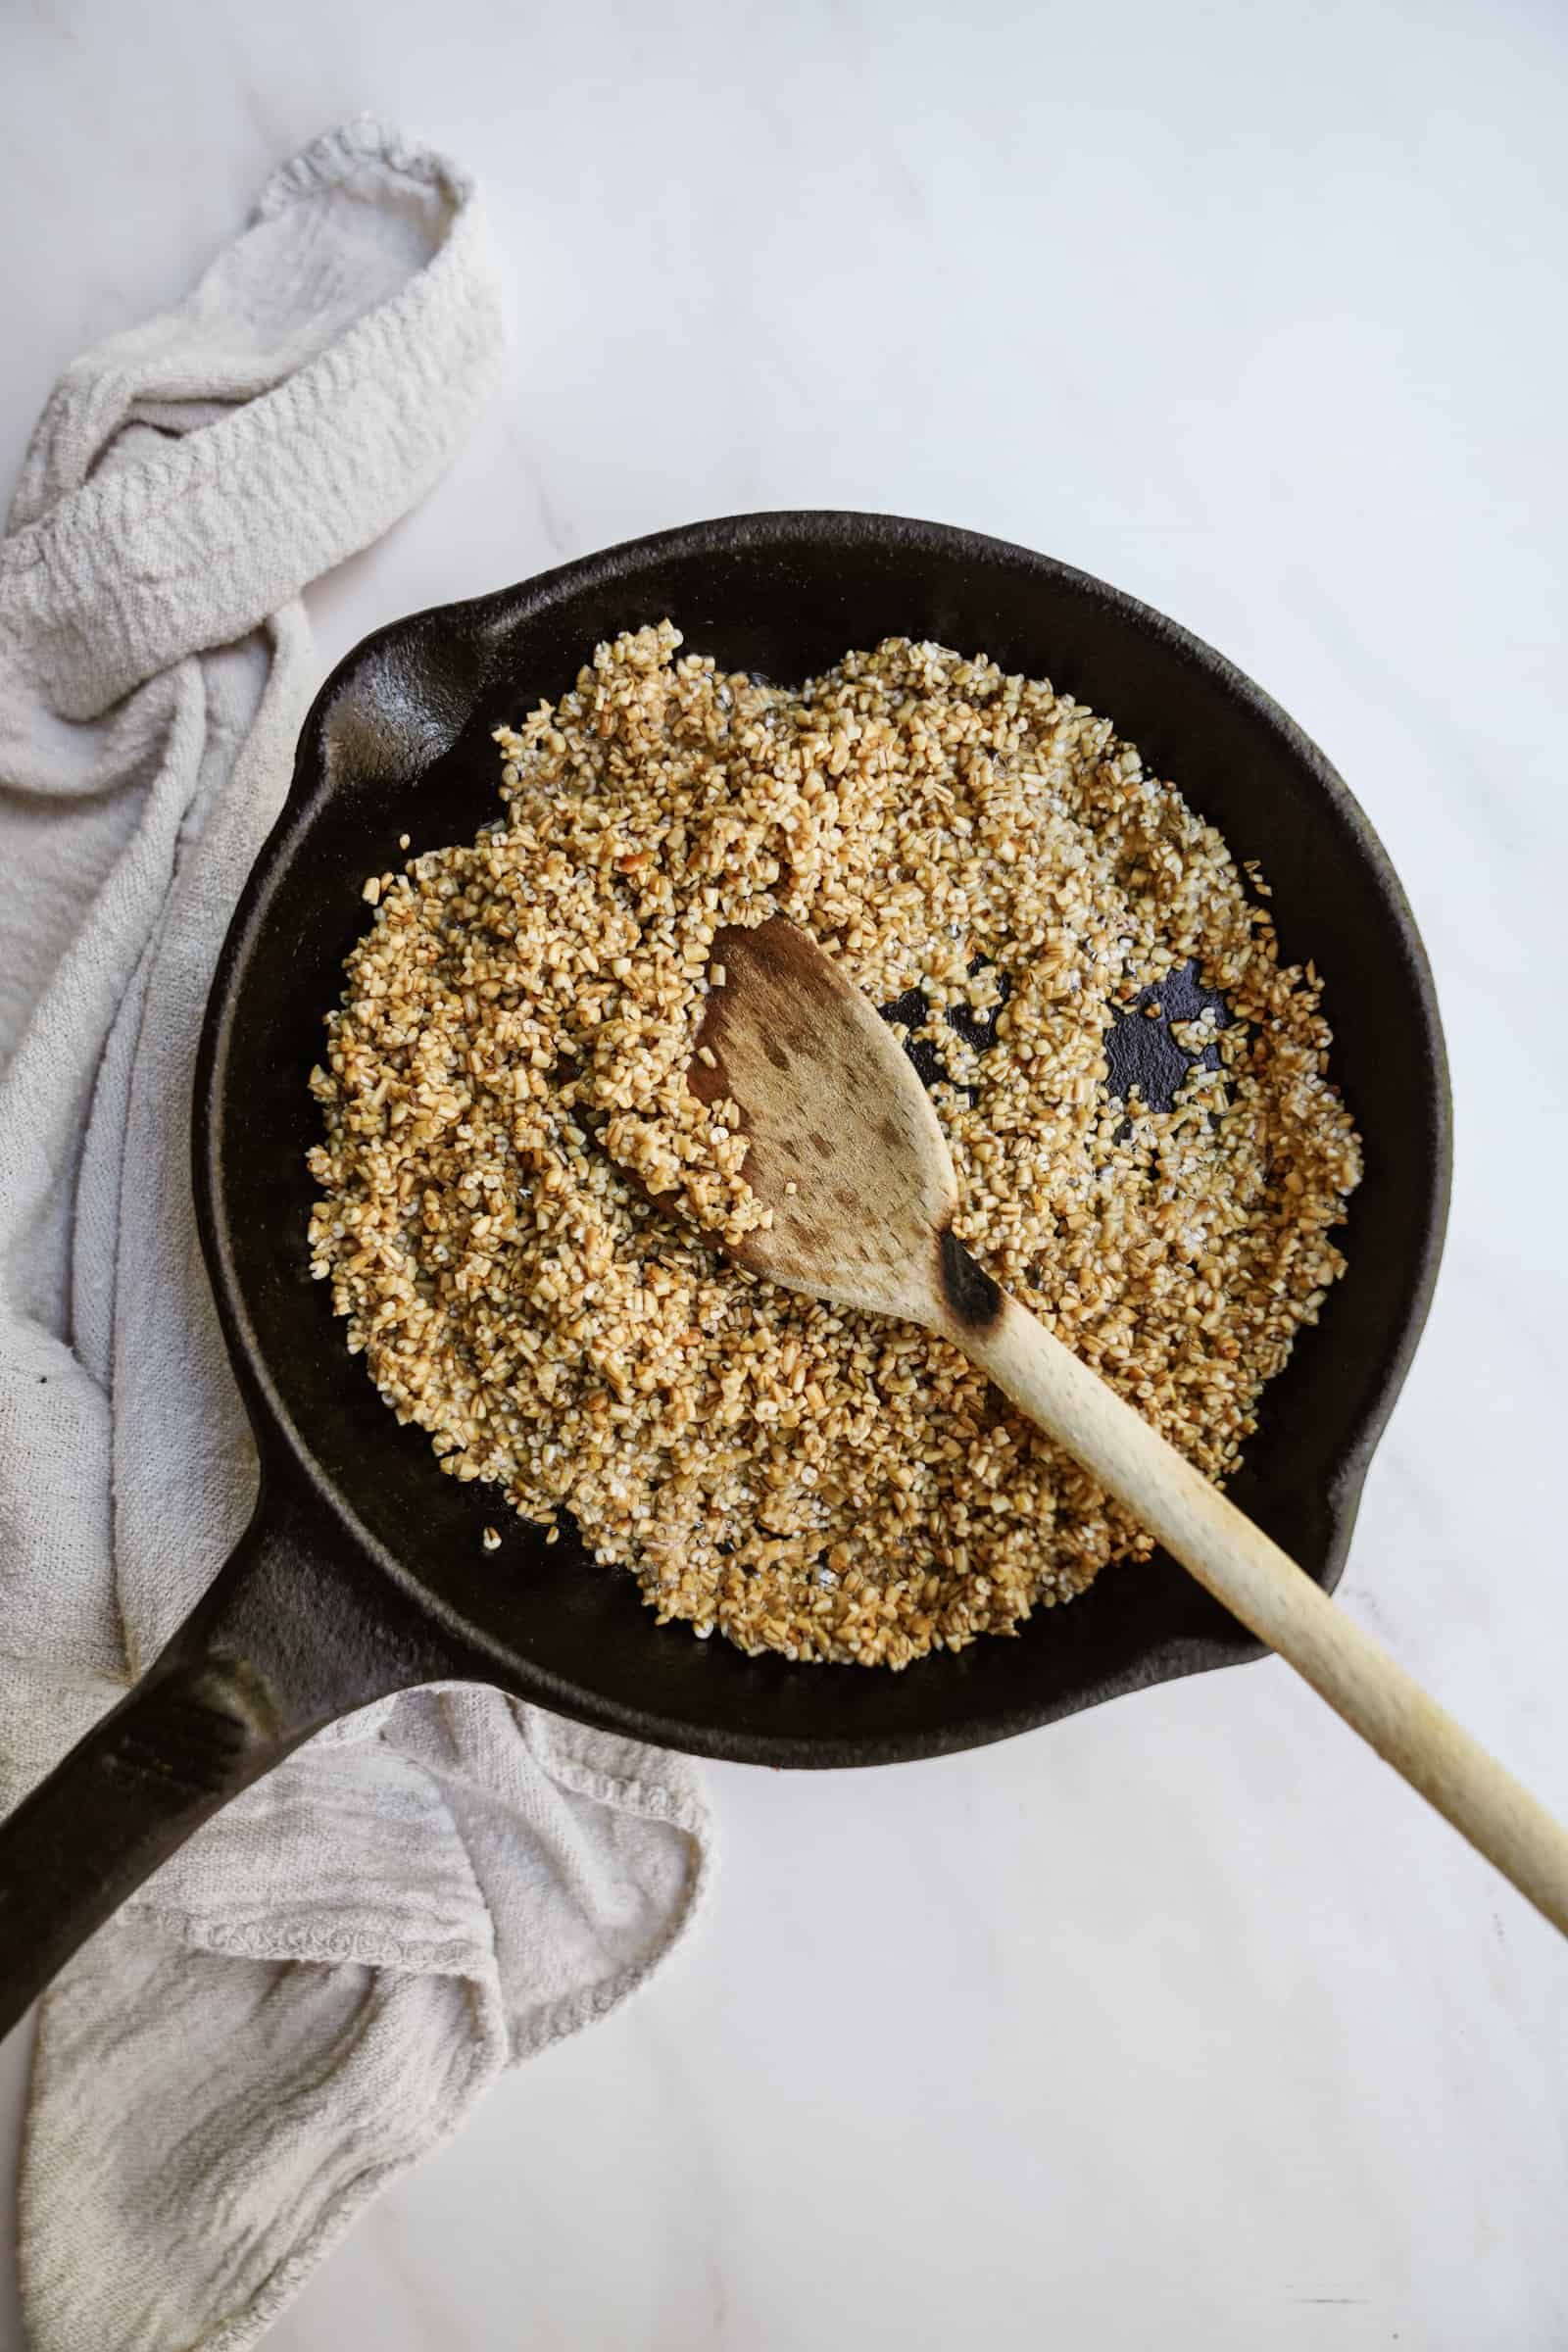 Oats being toasted in a pan